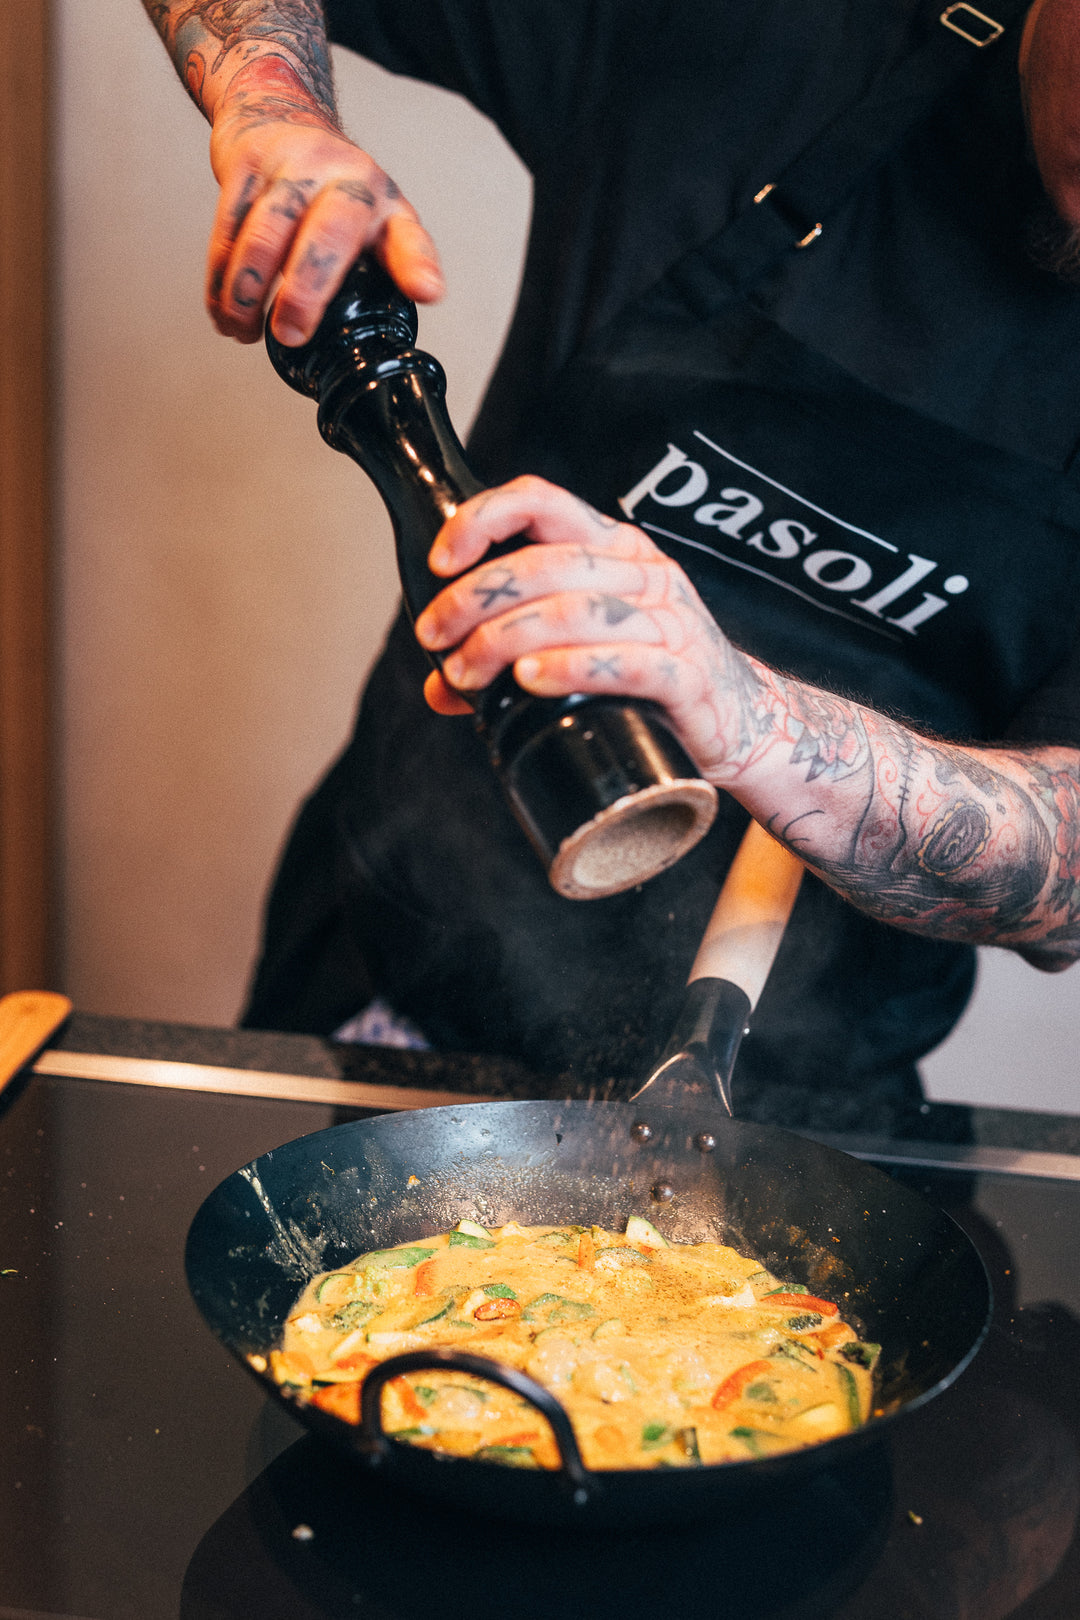 Our professional chef Mane uses a large pepper mill to season his delicious vegetable pan in our pasoli wok.